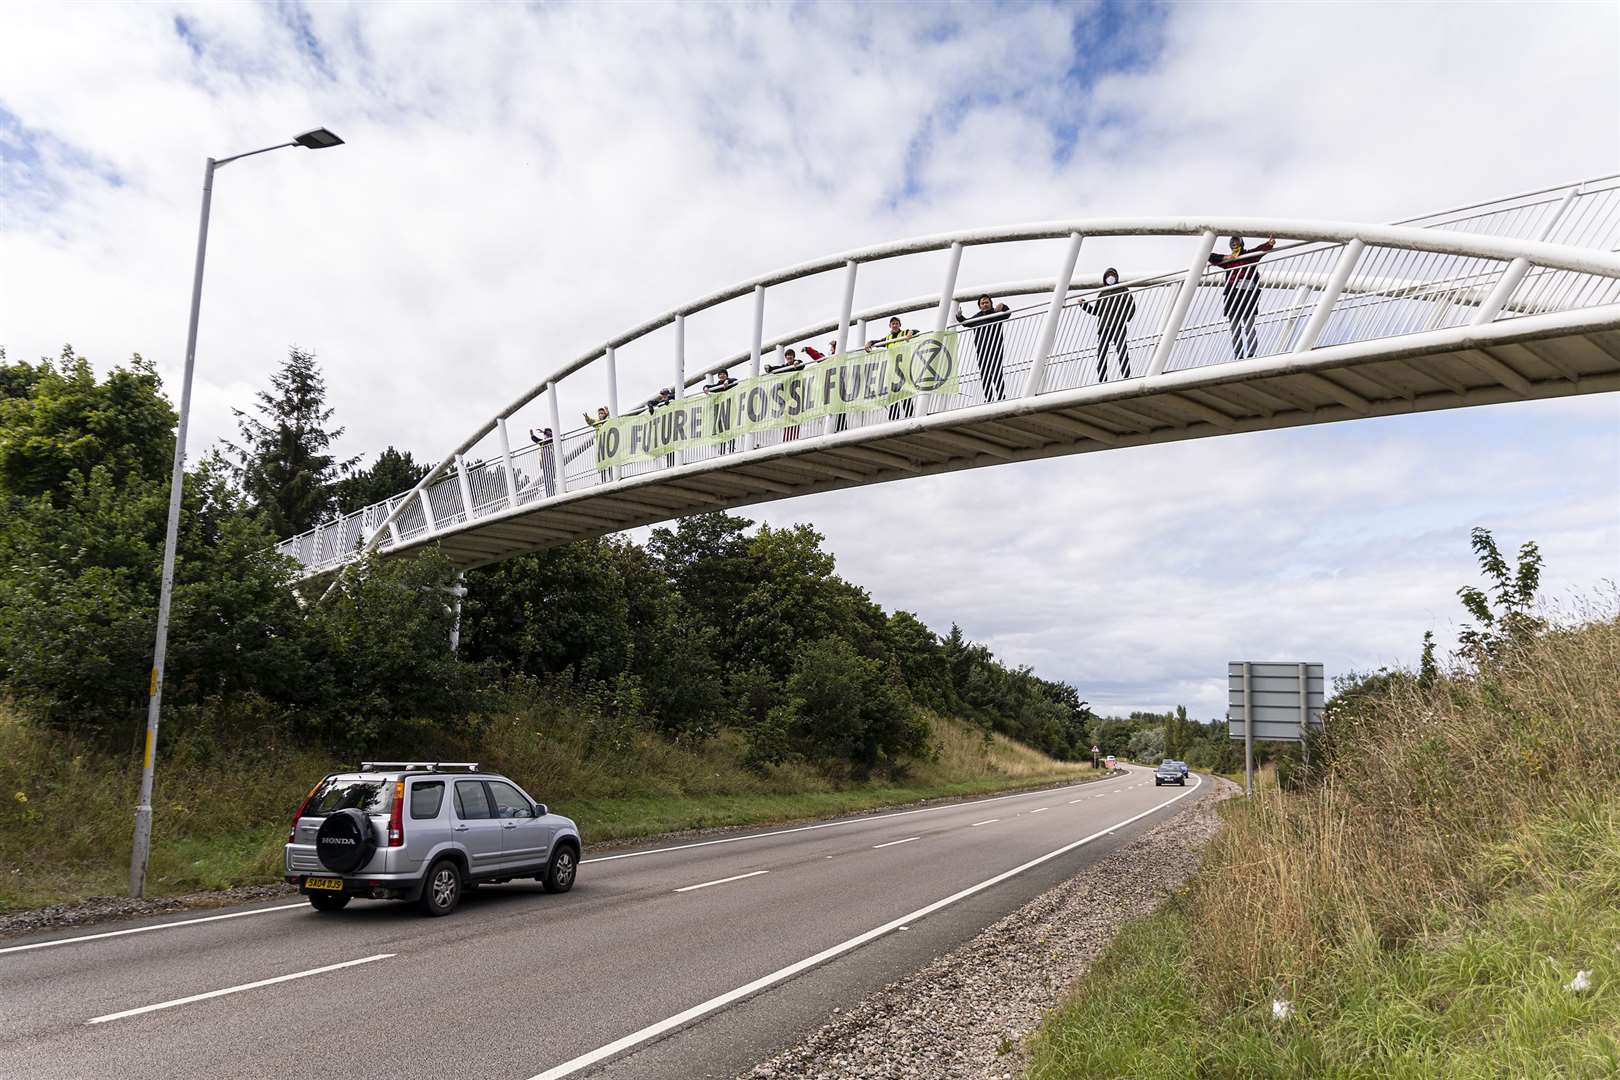 The XR Forres banner drop over the A96.